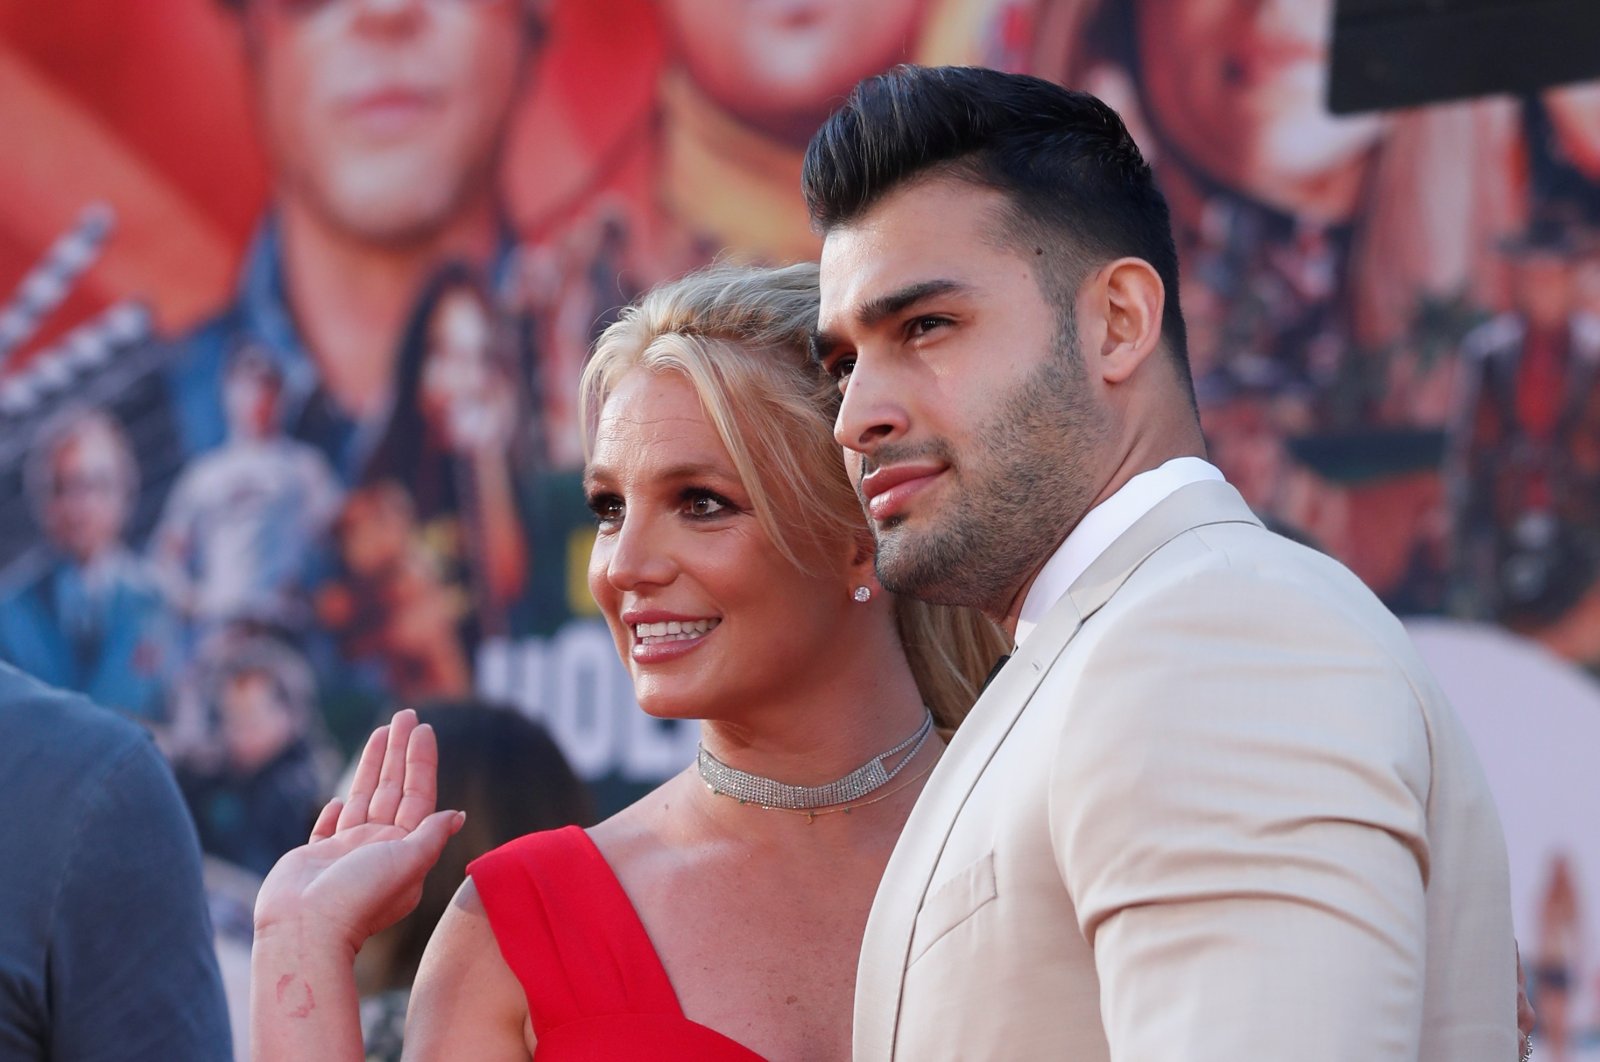 Britney Spears and Sam Asghari pose at the premiere of "Once Upon a Time In Hollywood" in Los Angeles, California, U.S., July 22, 2019. (REUTERS Photo)